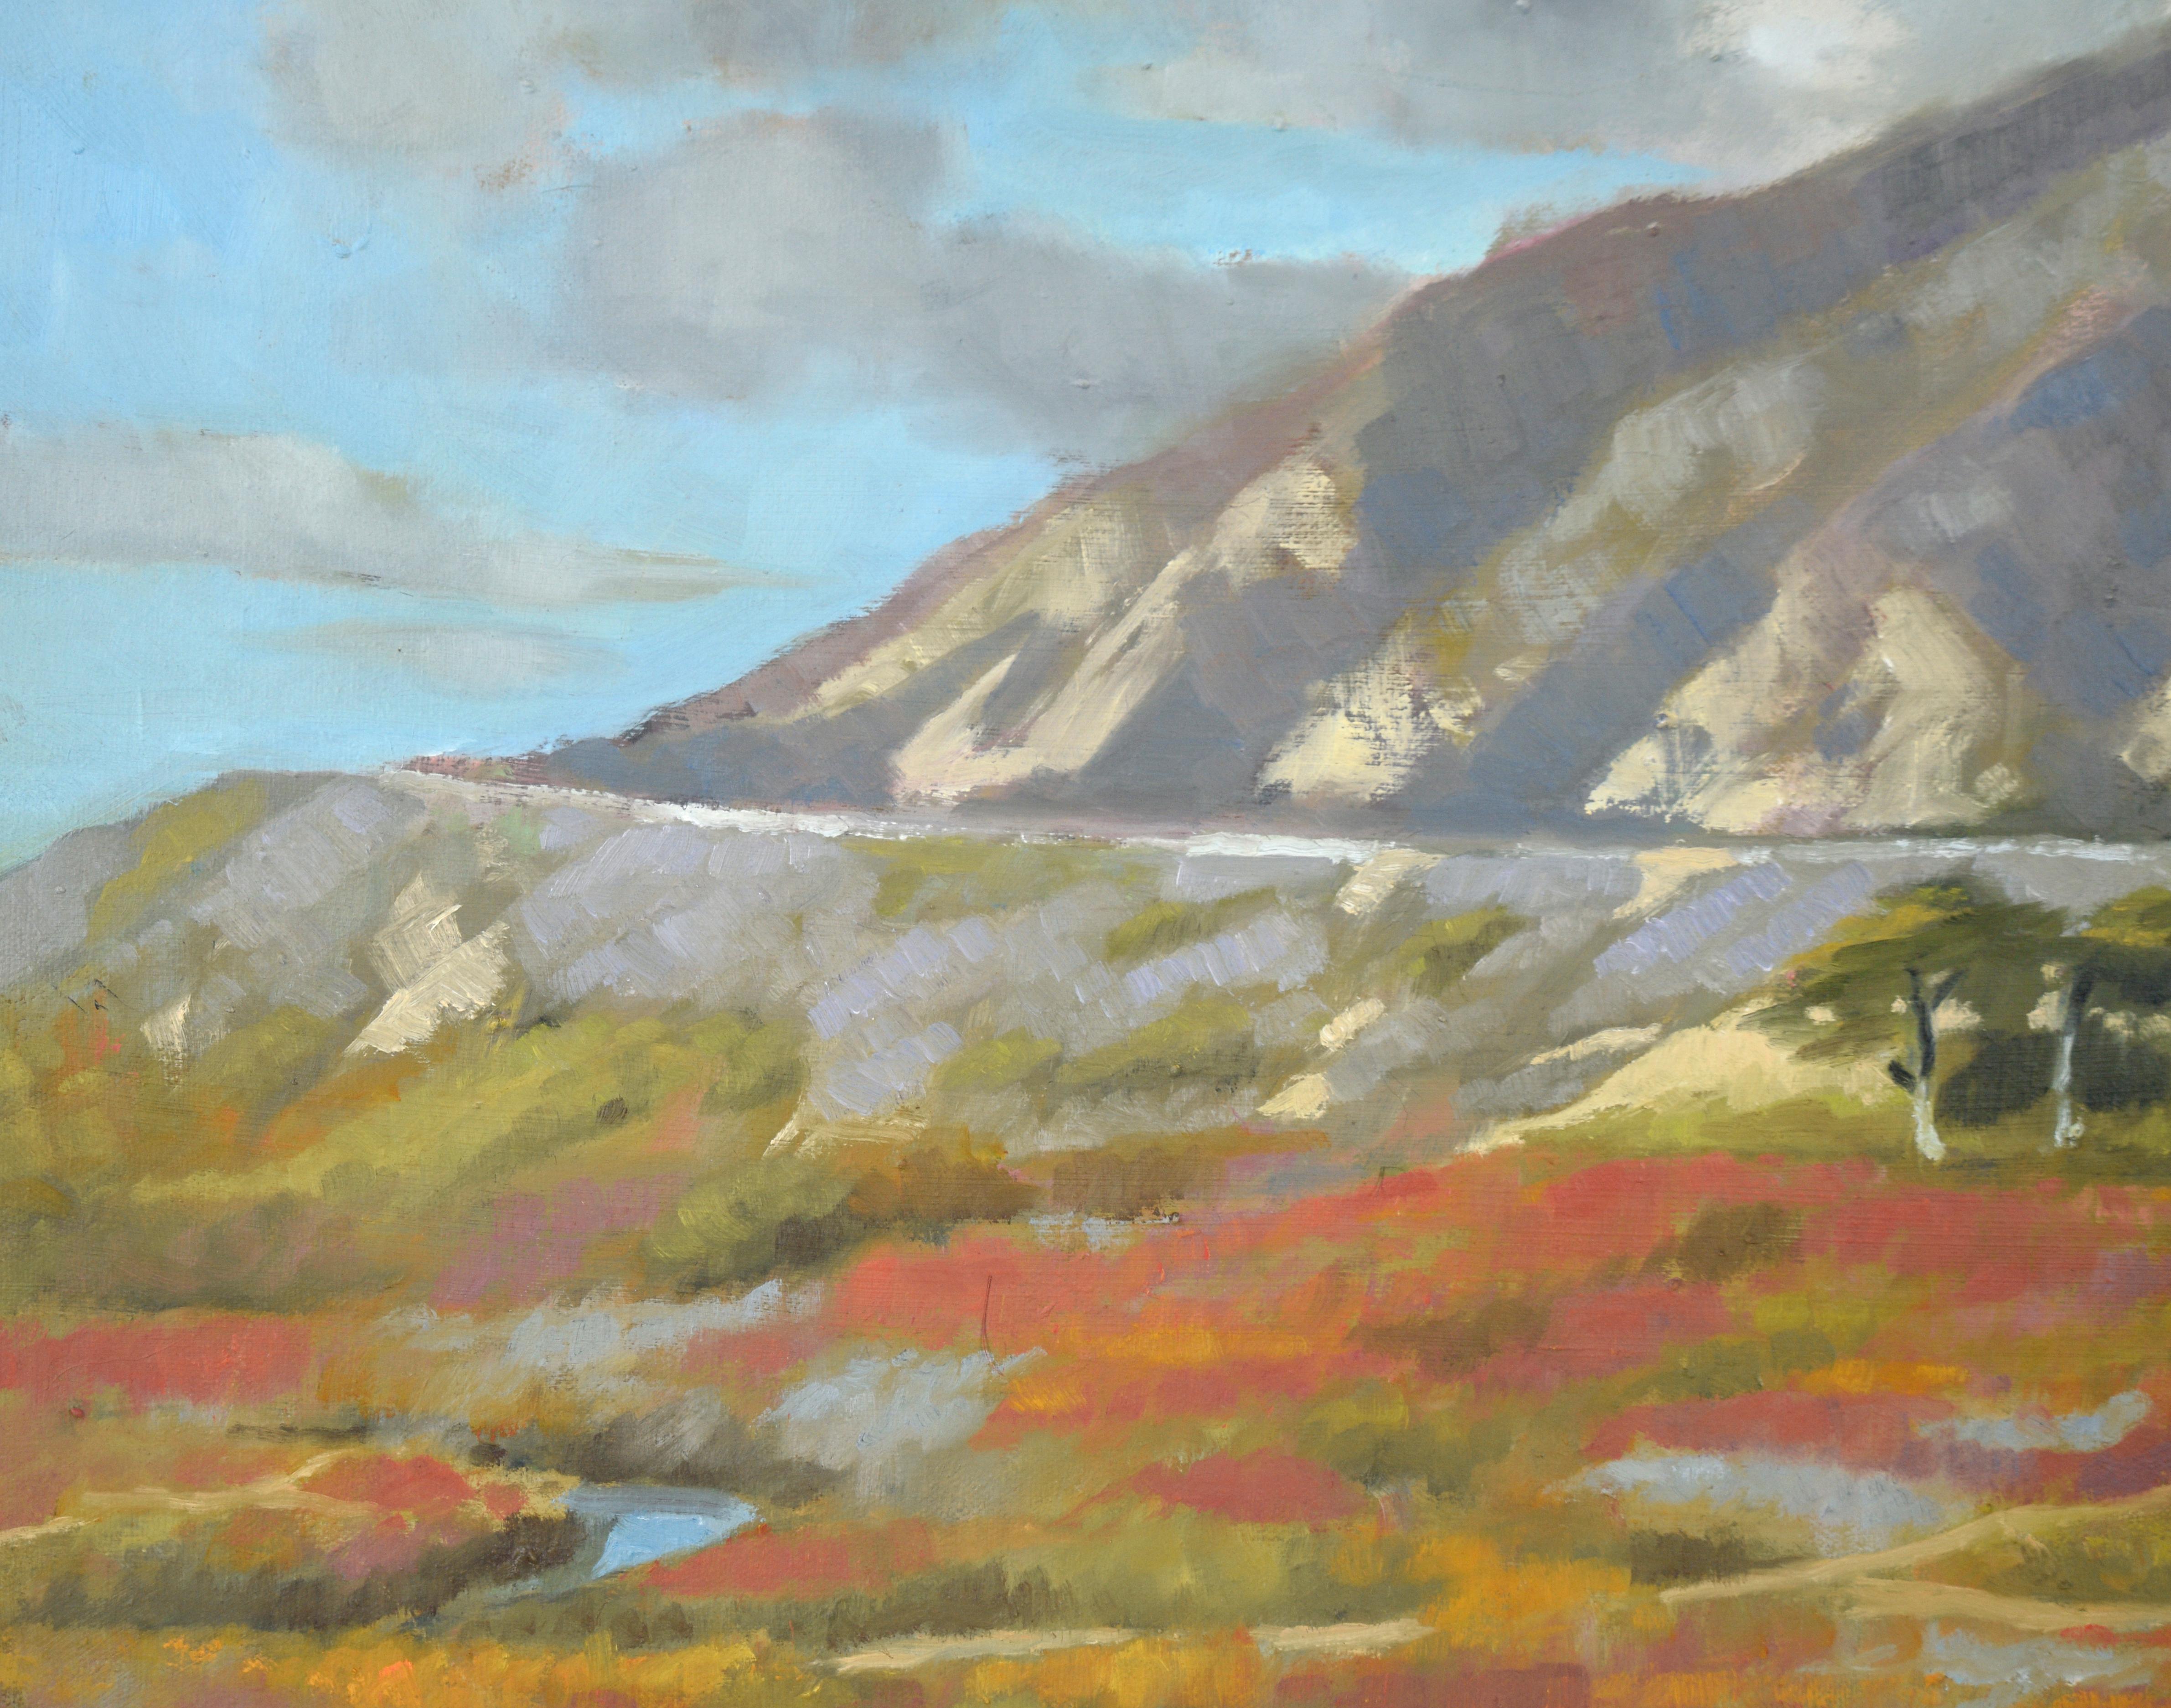 Mountain Landscape with Wildflowers in the Marsh in Acrylic on Canvas

Lush landscape by unknown central California coast artist Maria Pavao Hadsell (Portugal/American, 20th Century). The viewer stands at the edge of a marshy area, filled with